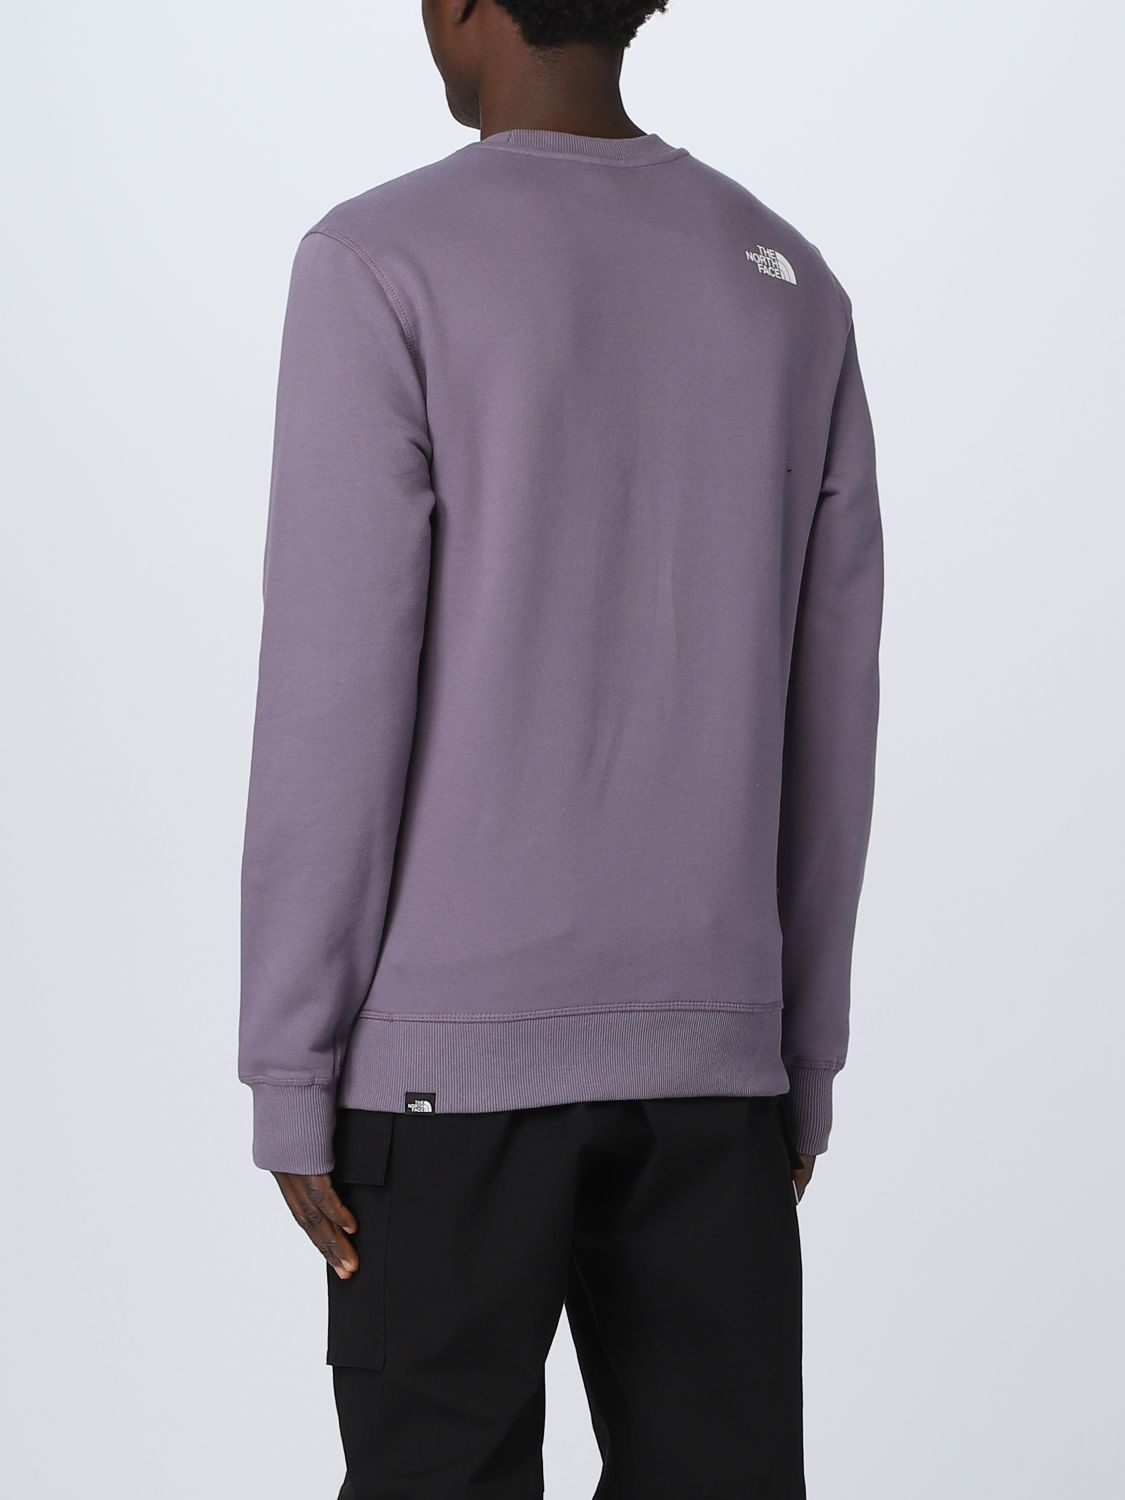 THE NORTH sweatshirt for man - Violet | The North Face sweatshirt NF0A7X1I online on GIGLIO.COM